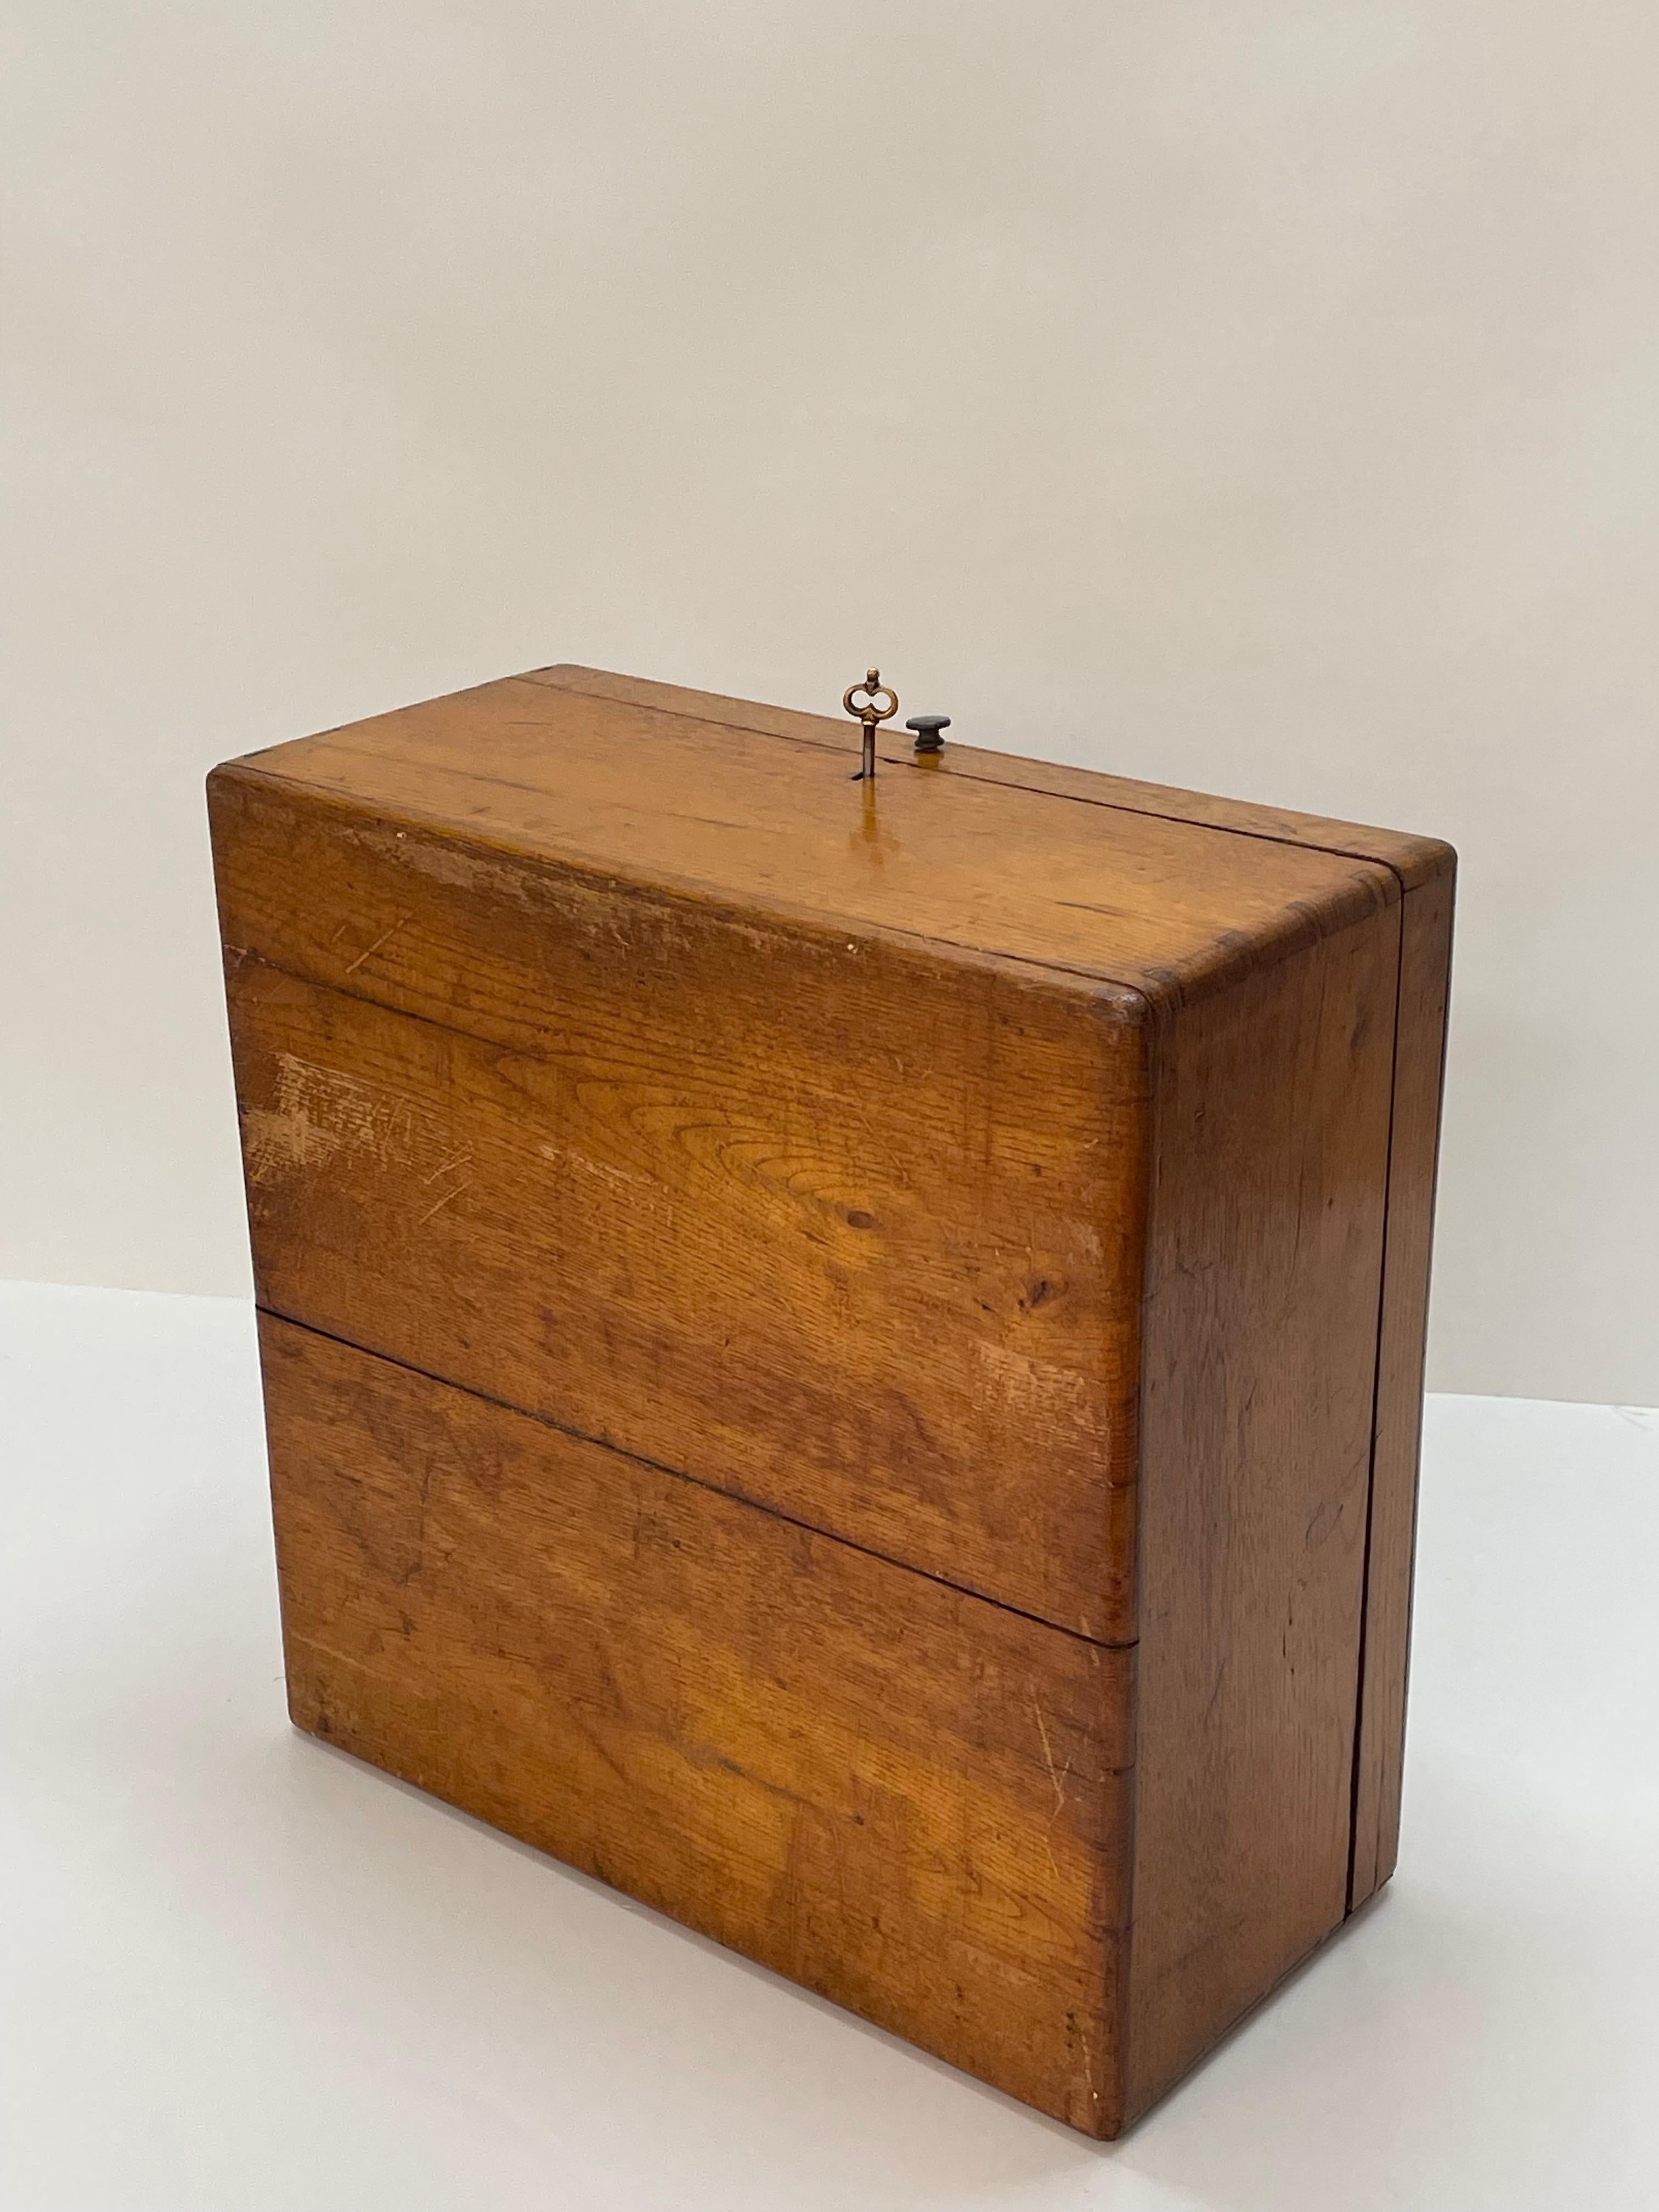 Early 20th Century Large Wooden Inlaid Squared Italian Chessboard Box, 1900s For Sale 6